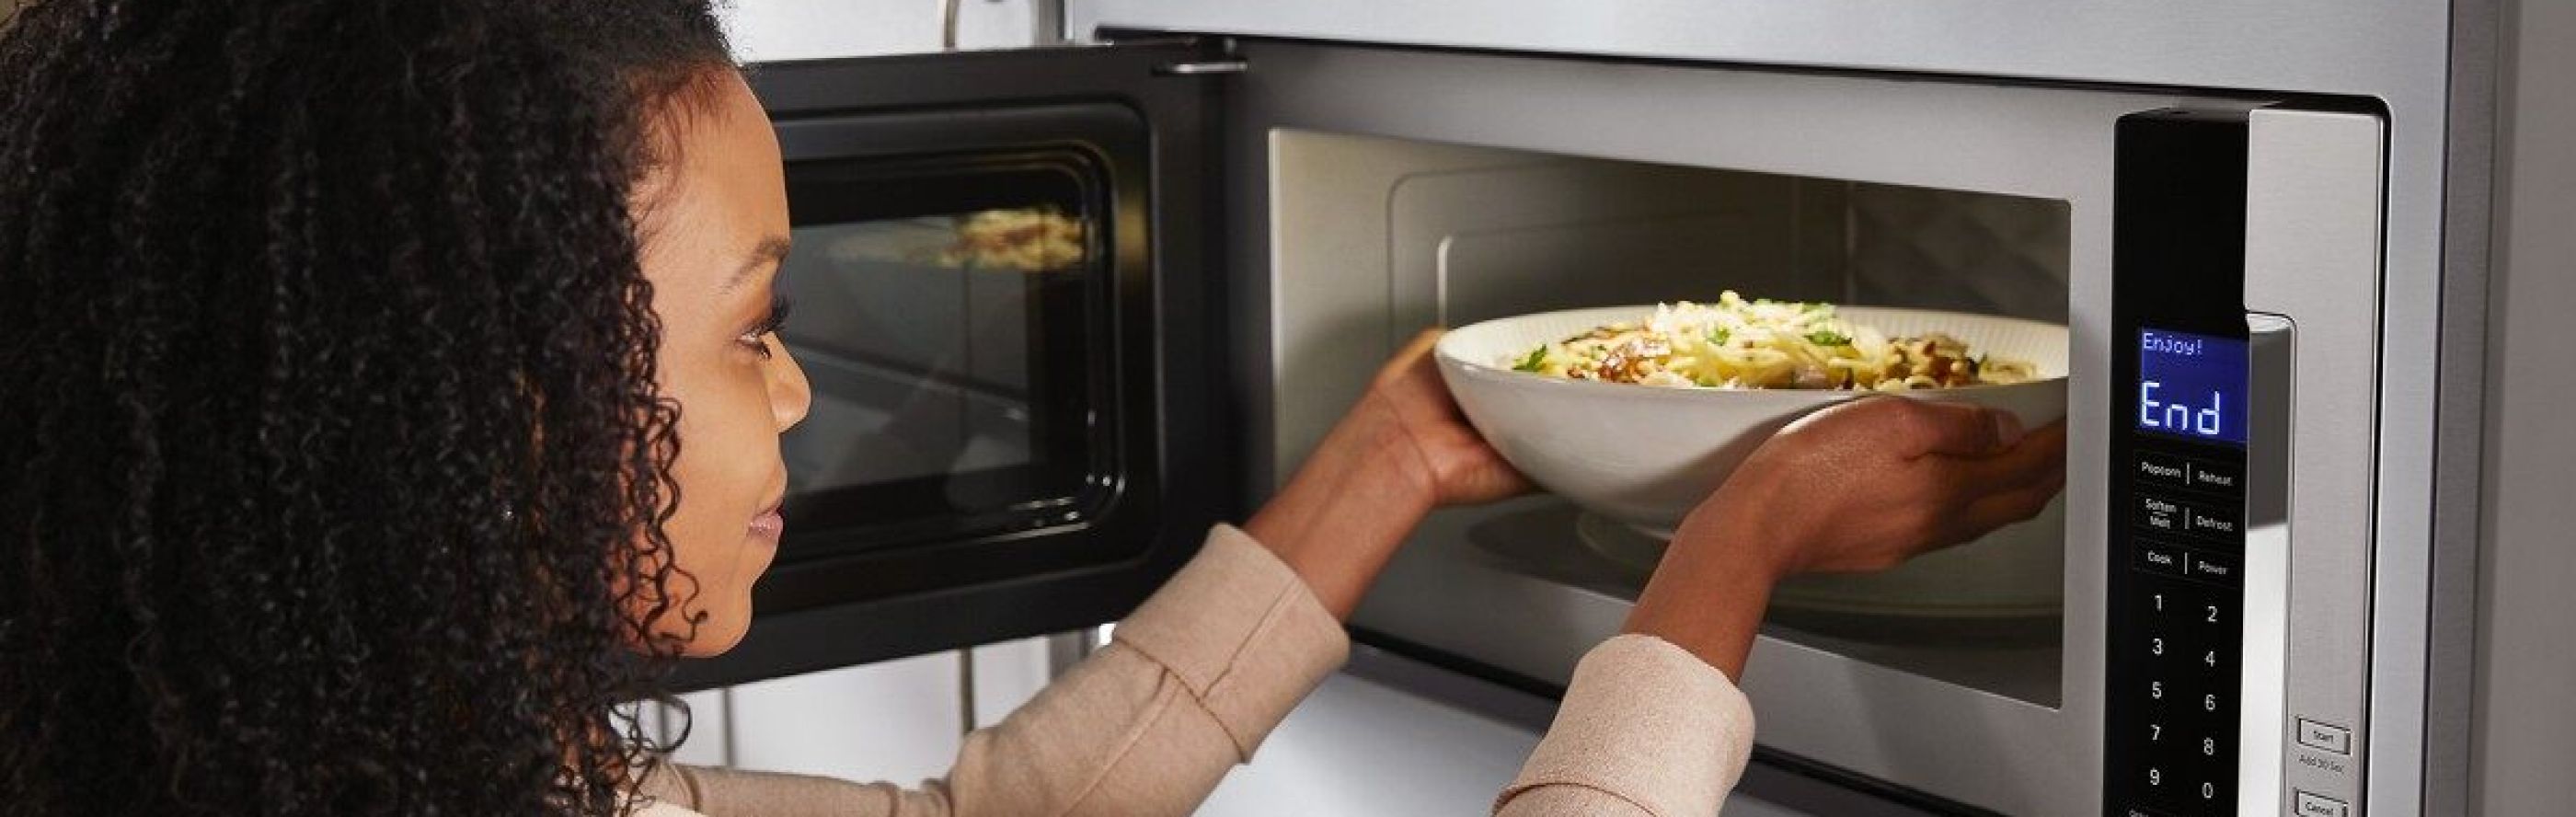 Person placing a bowl inside a built-in microwave